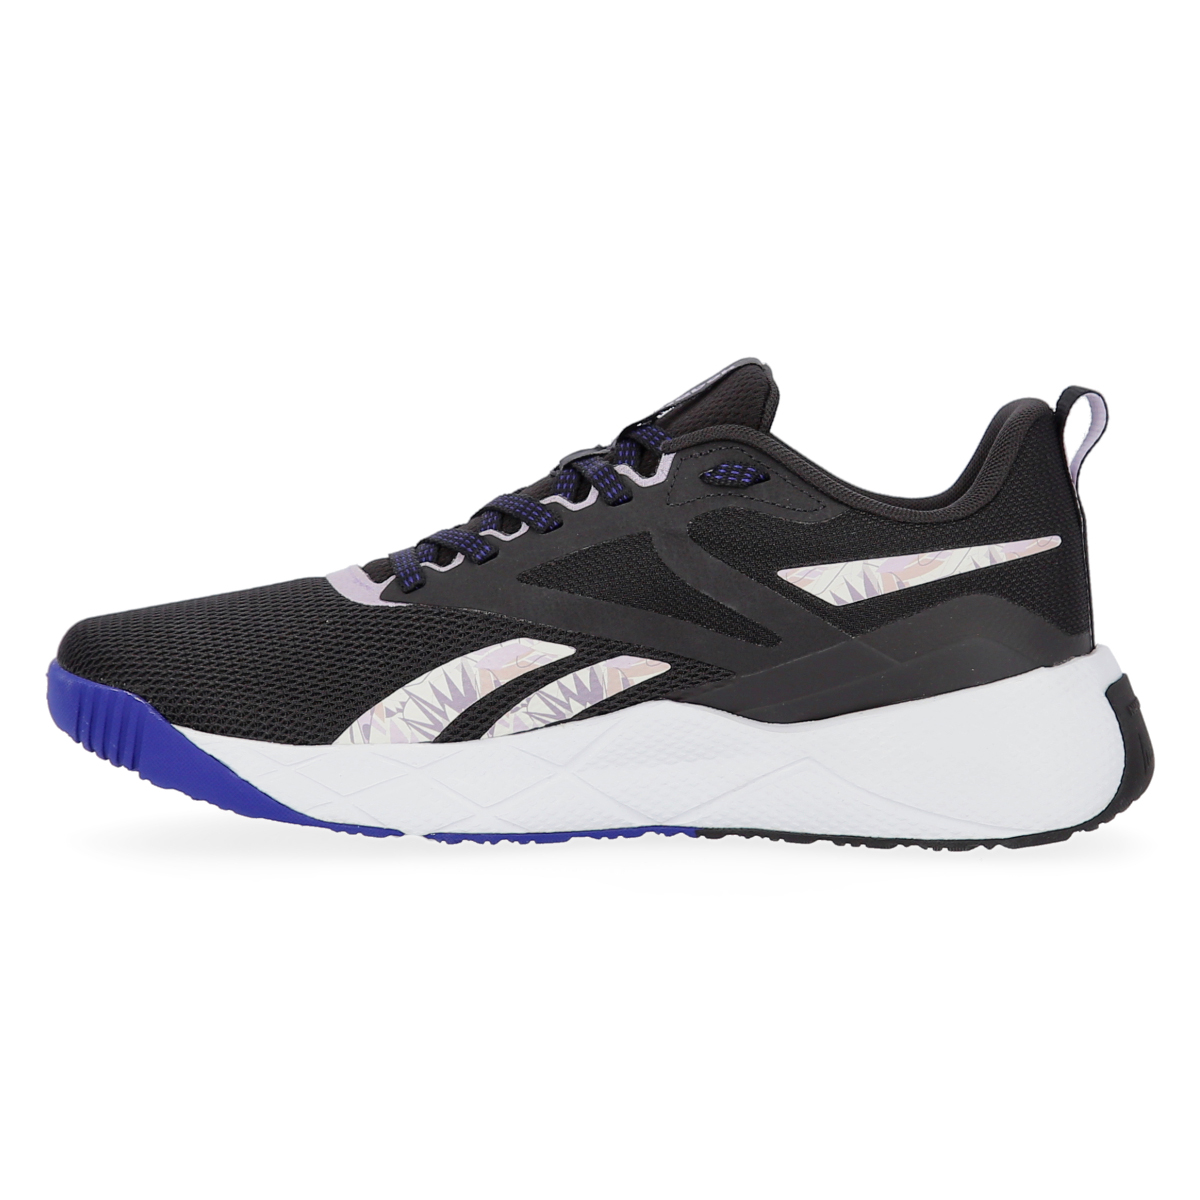 Zapatillas Reebok Nfx Mujer,  image number null